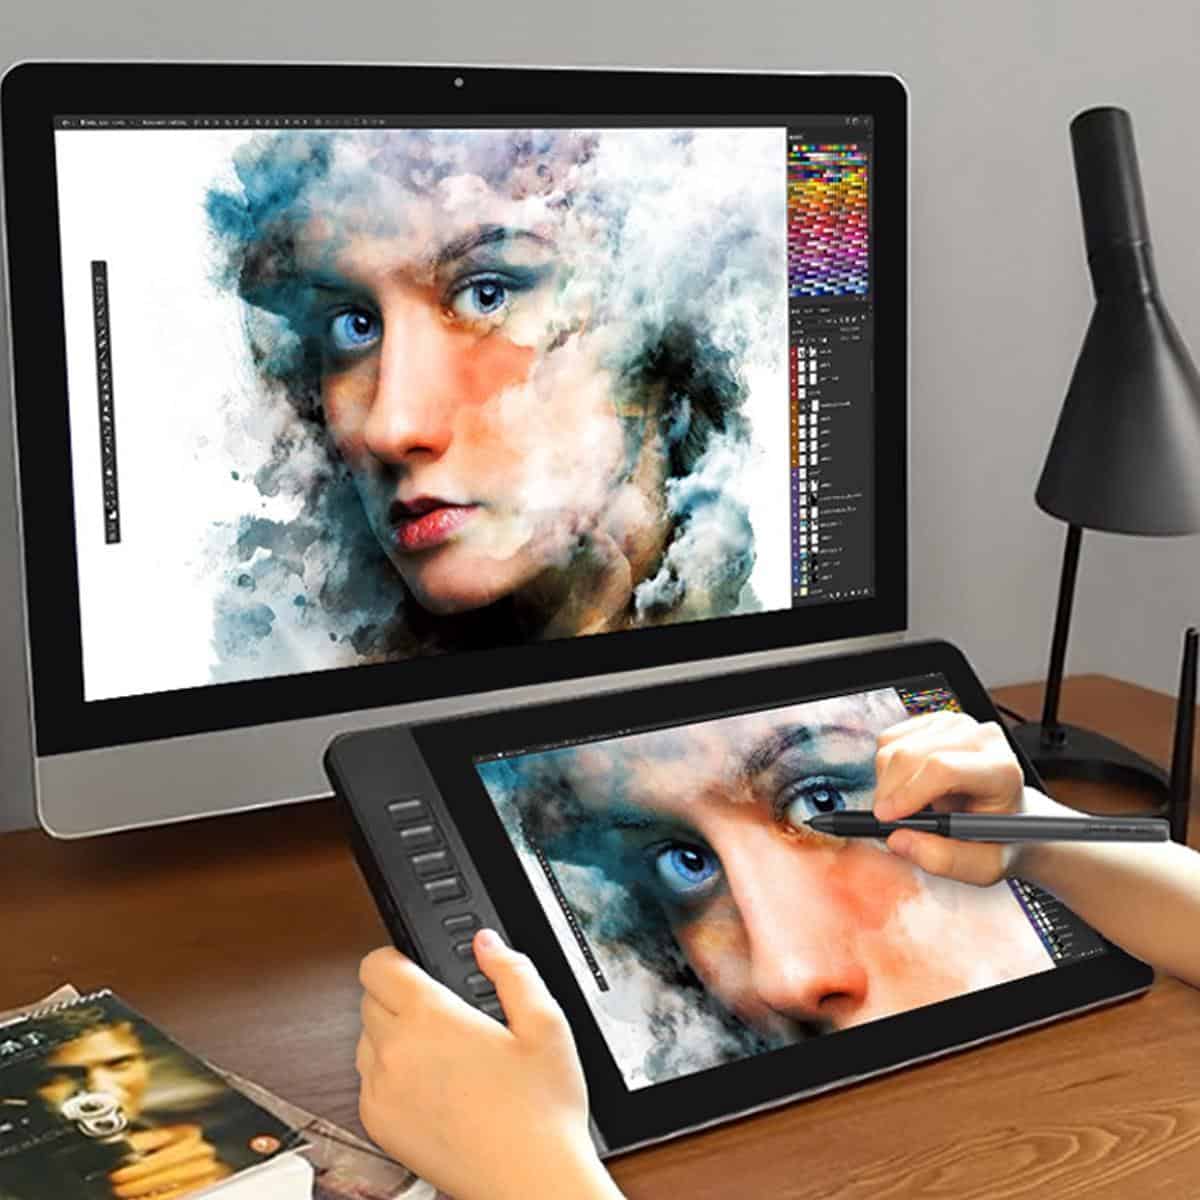 GAOMON PD1561 15.6 Inches IPS HD Graphics Drawing Tablet Monitor 72% NTSC Color Gamut with 8192 levels Battery-free pen